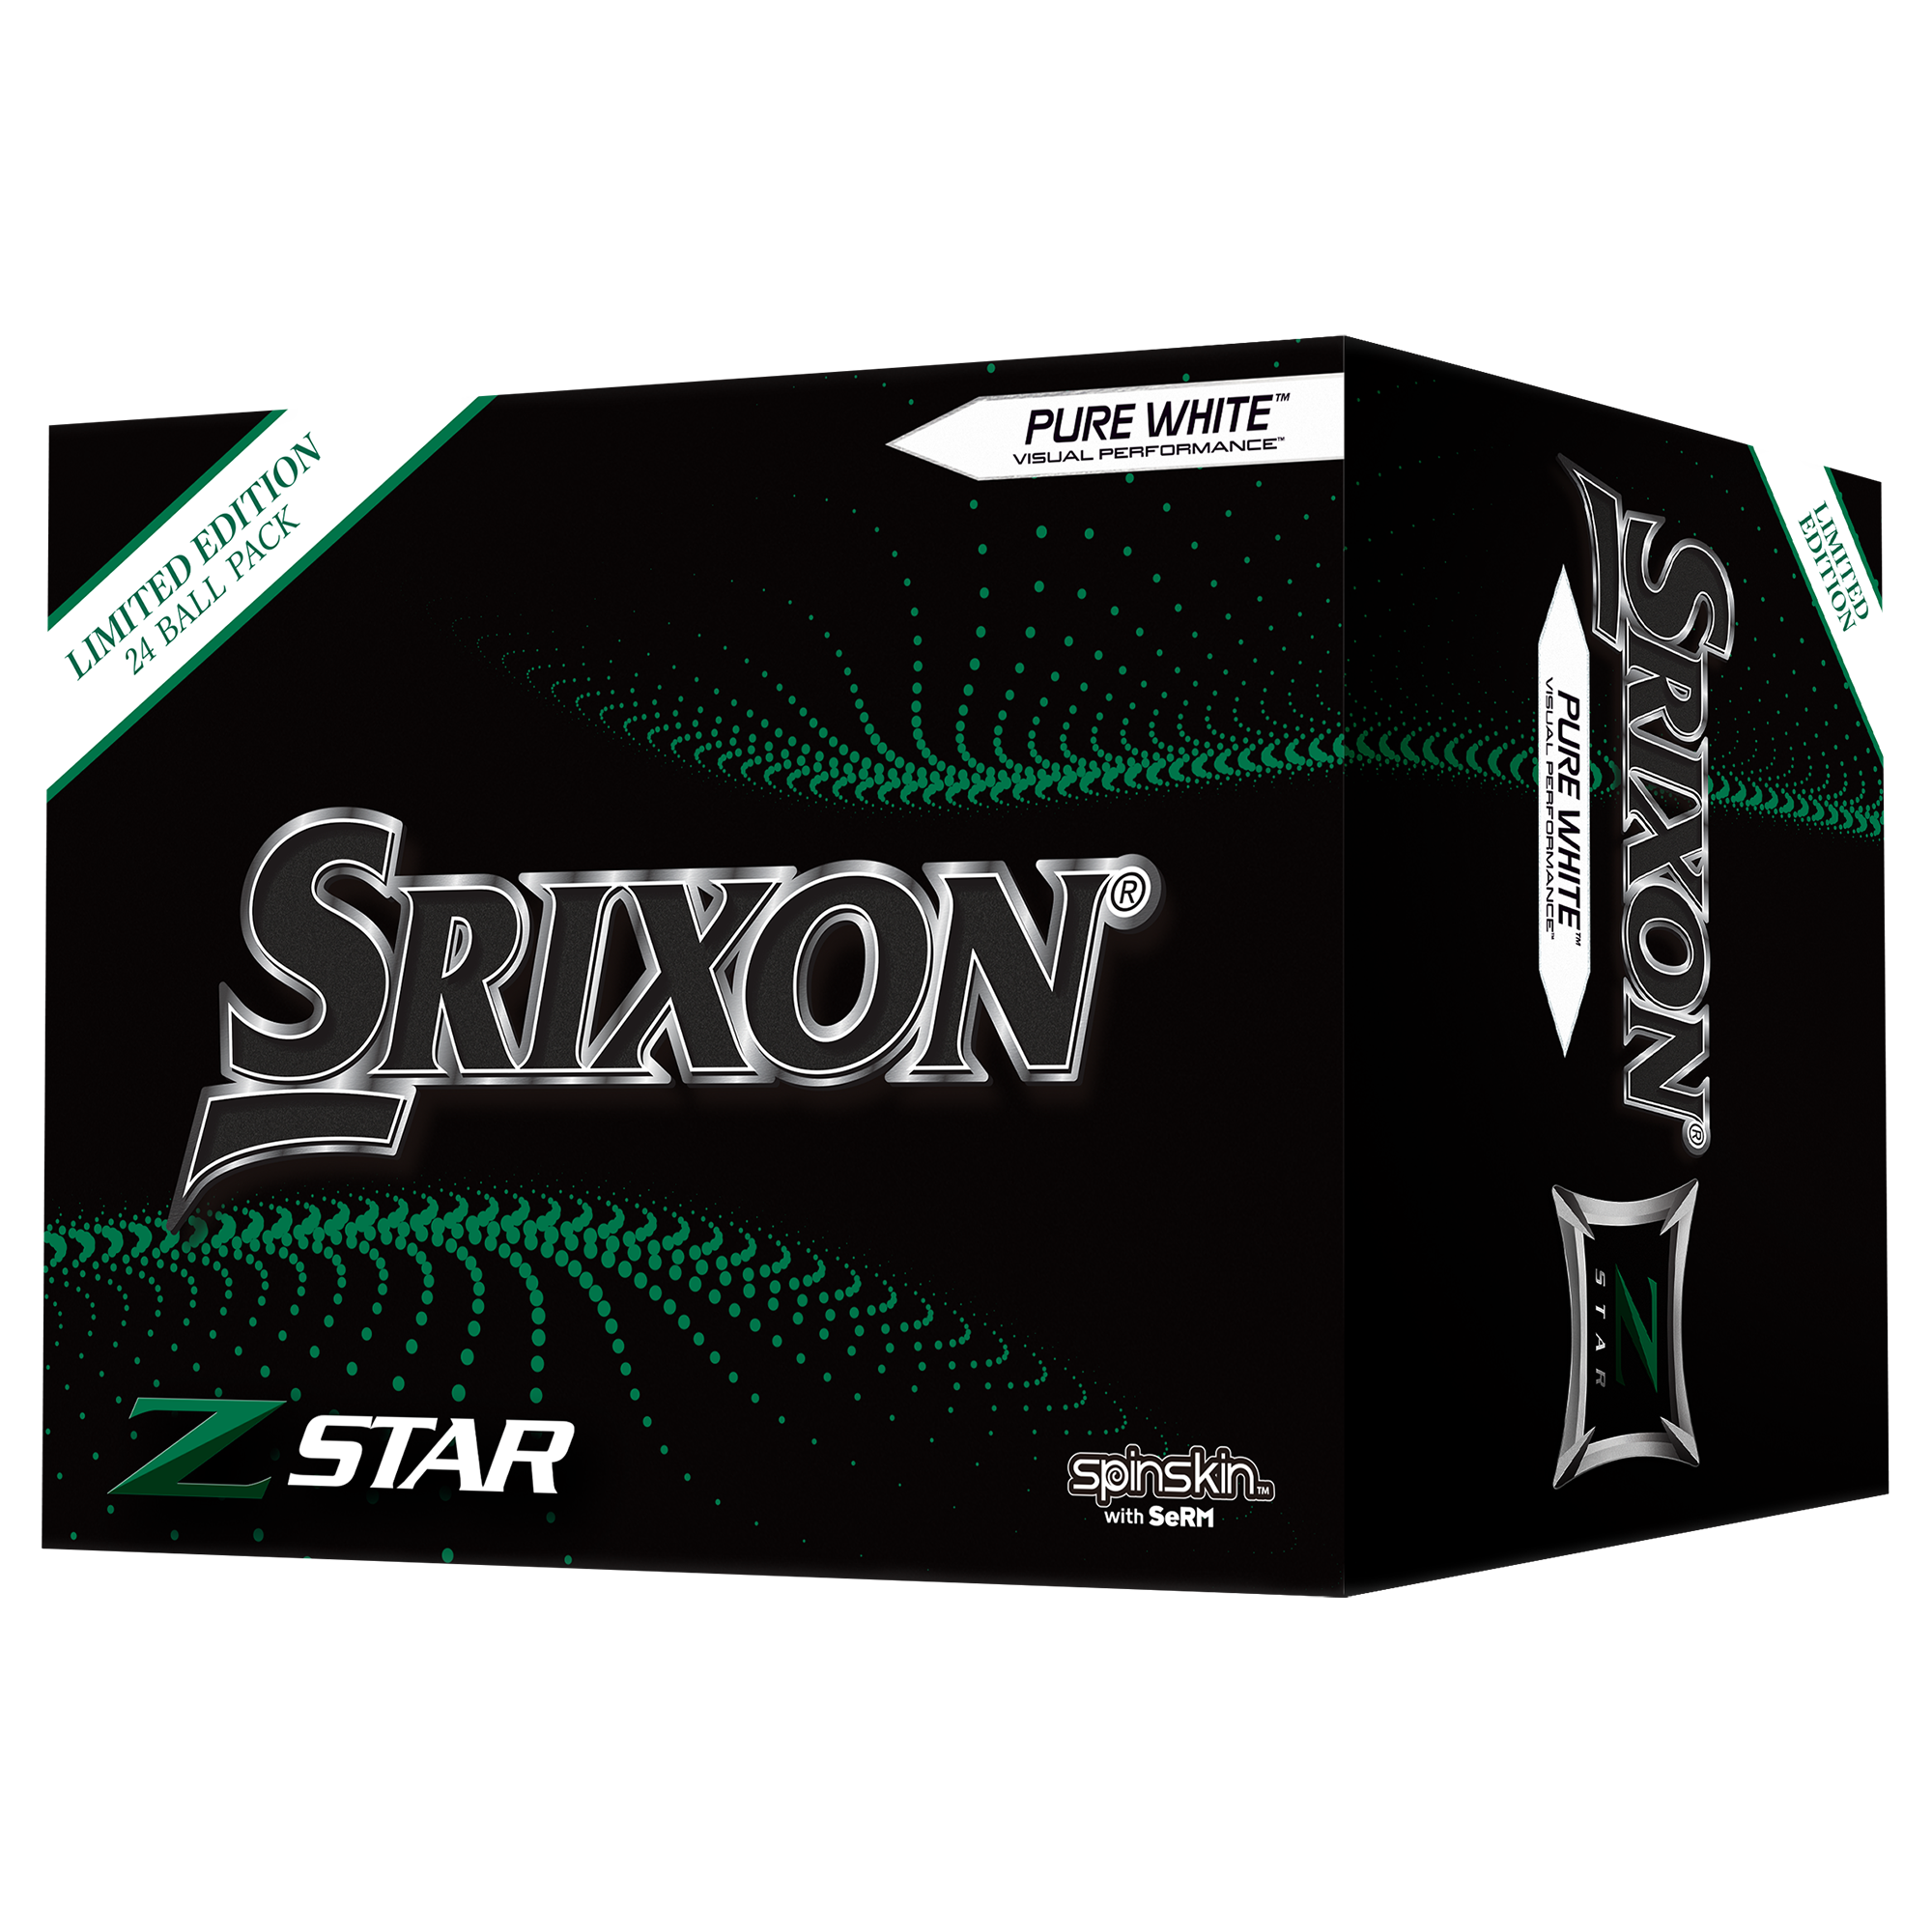 Srixon Z-Star 7 Limited Edition 24 Ball Pack | PGA TOUR Superstore